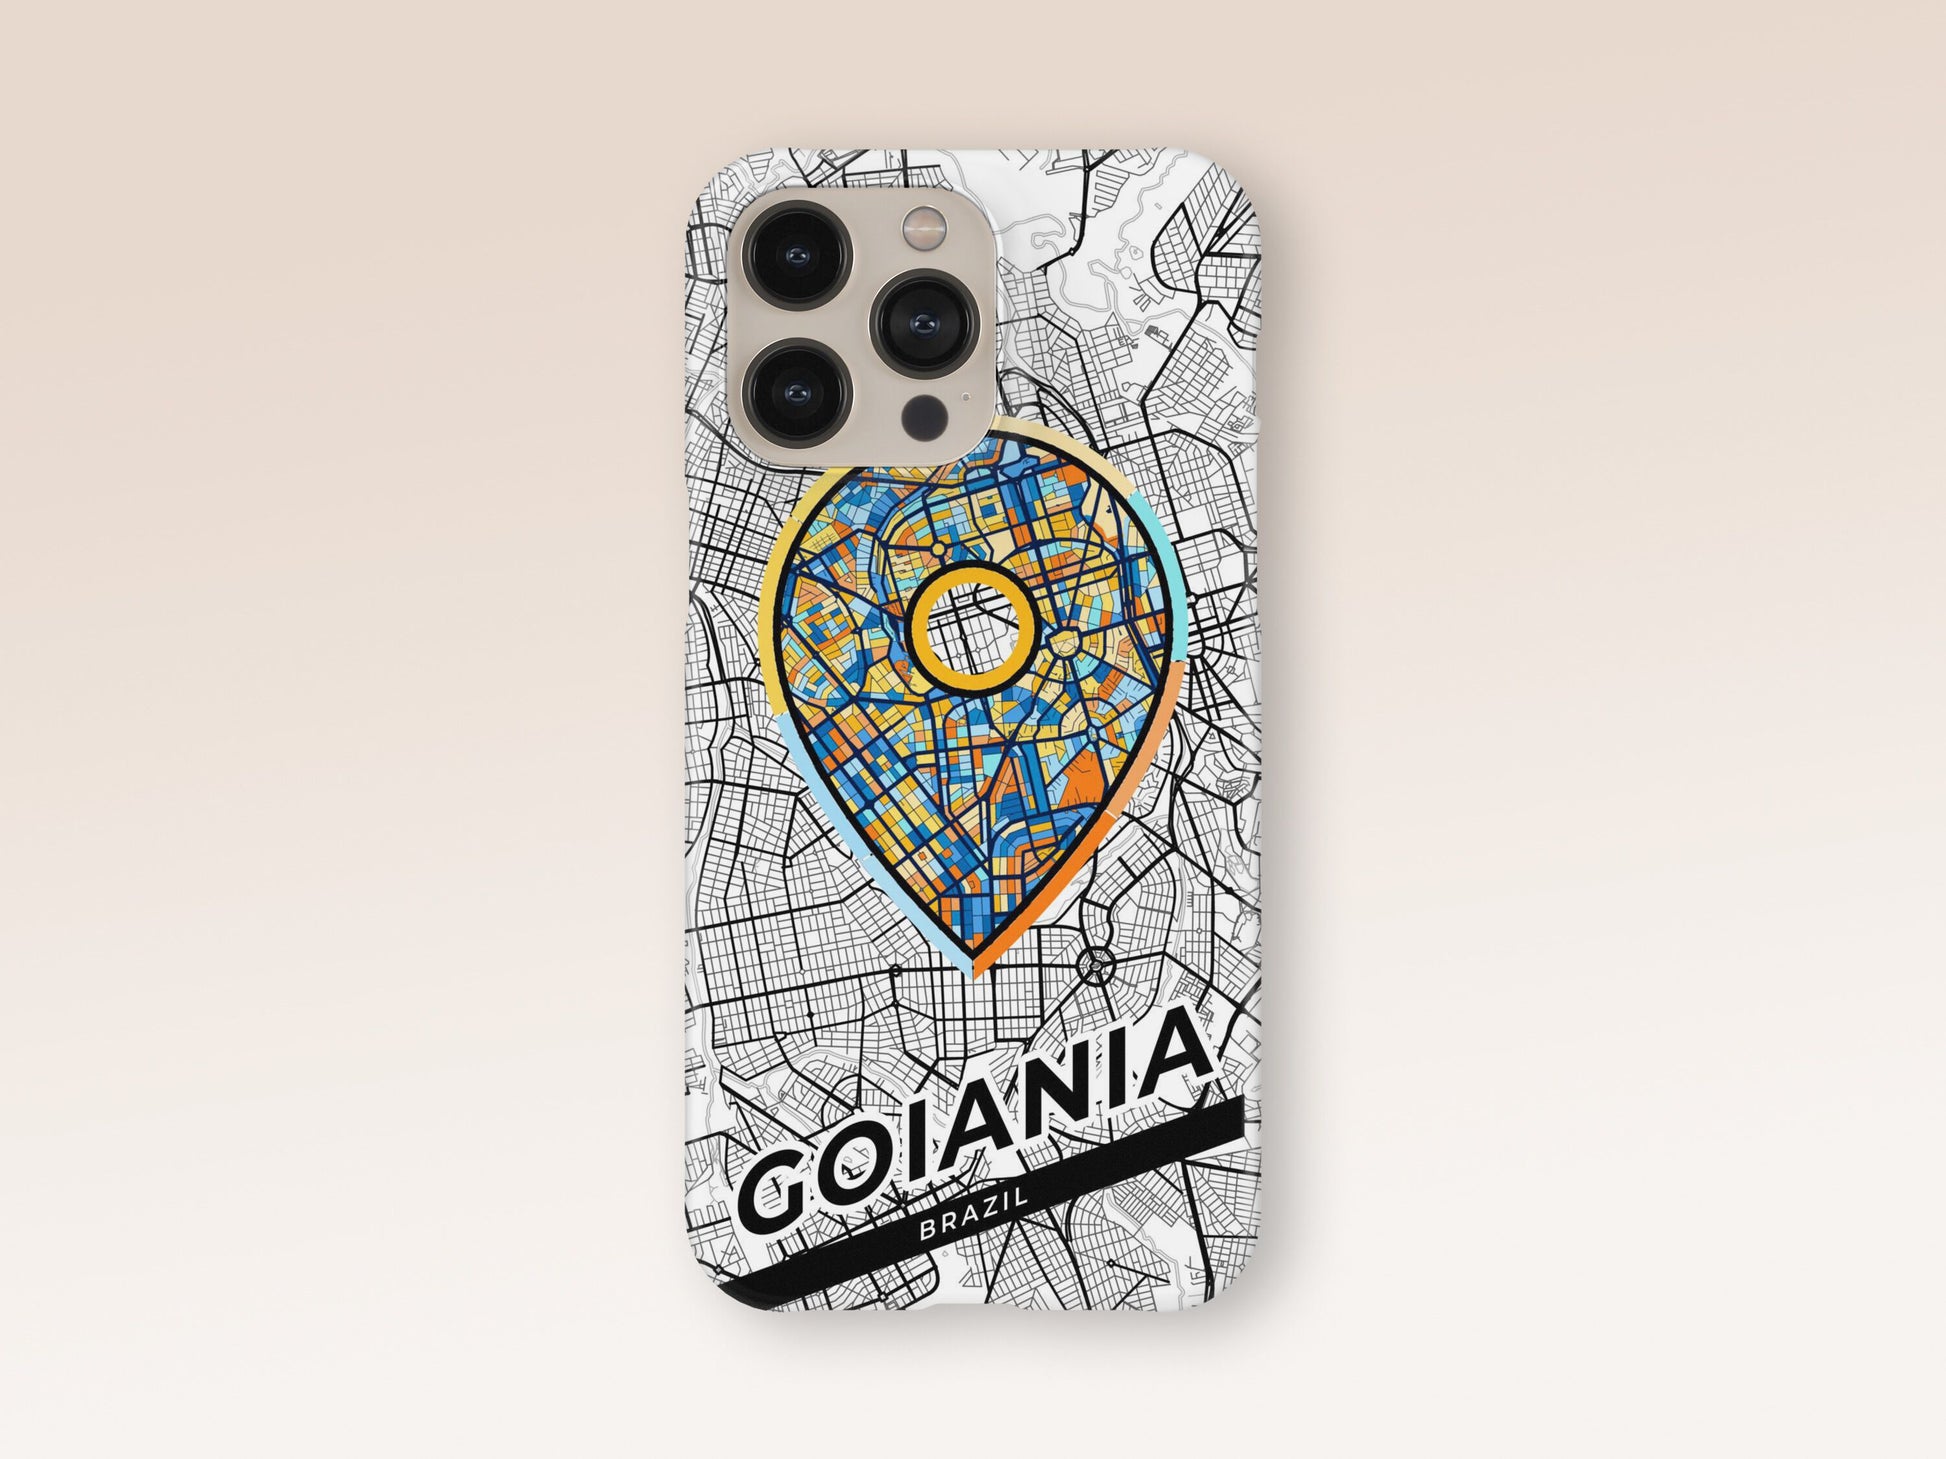 Goiania Brazil slim phone case with colorful icon. Birthday, wedding or housewarming gift. Couple match cases. 1